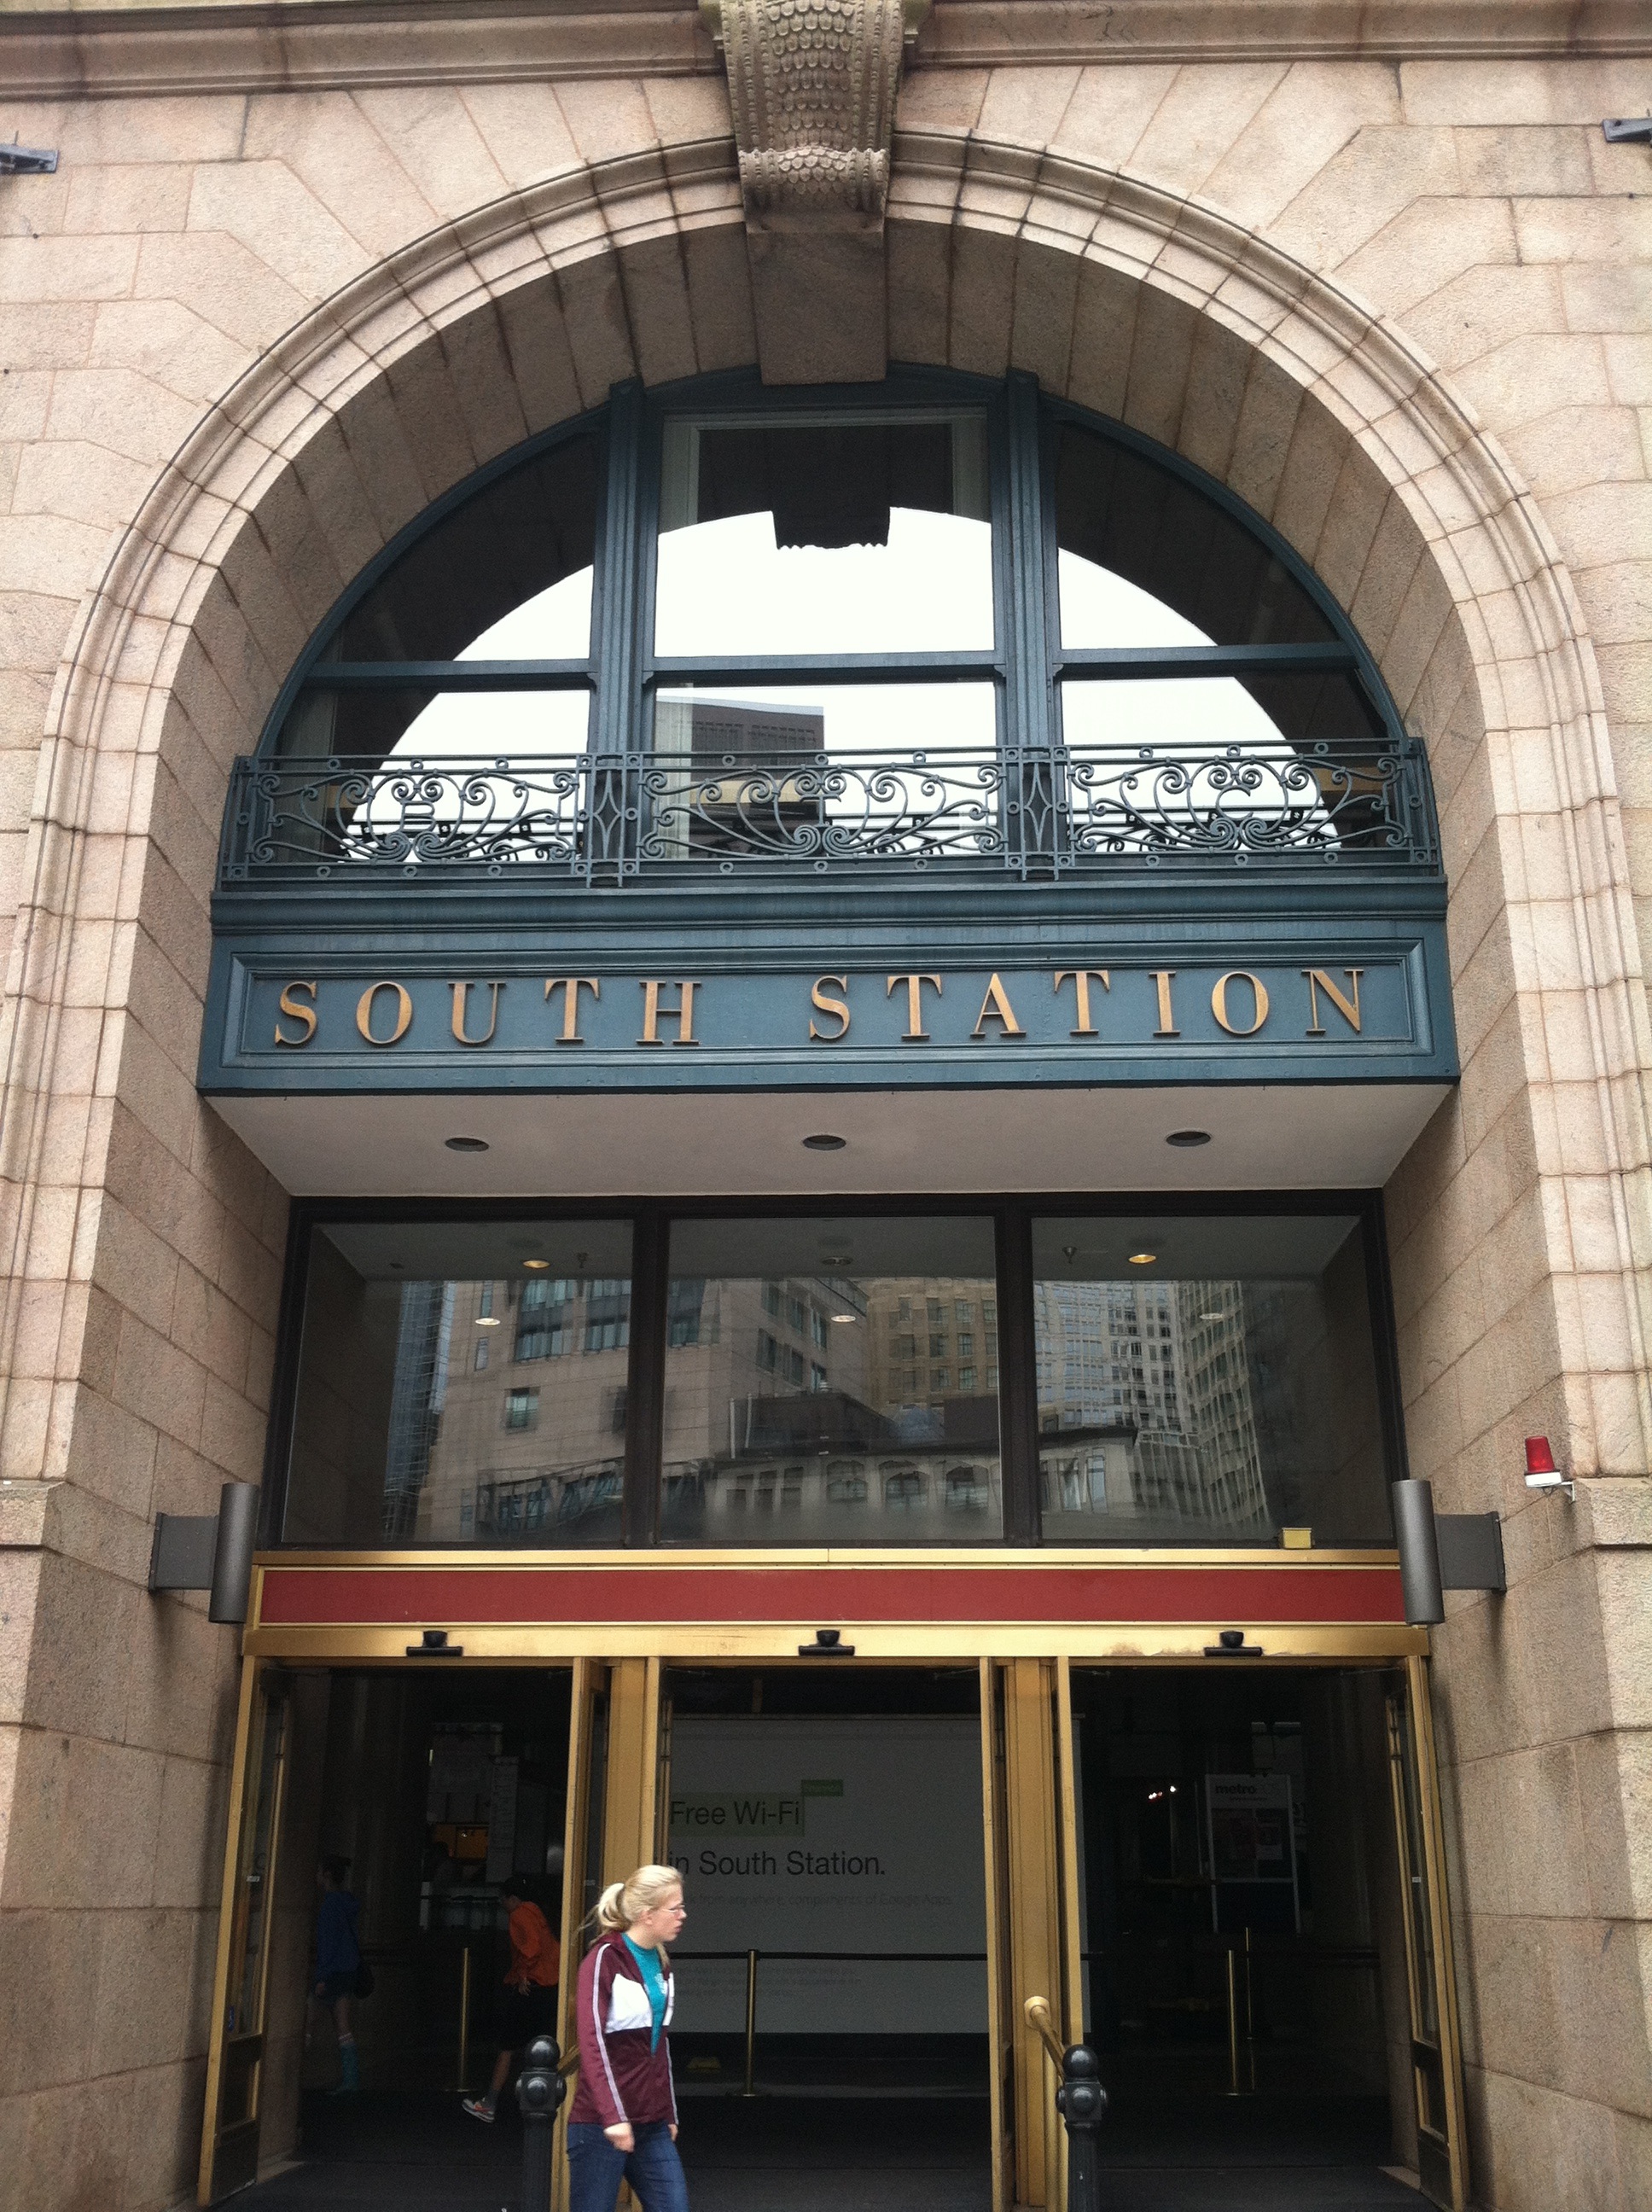 South Station, start of the grand transcontinental railway adventure